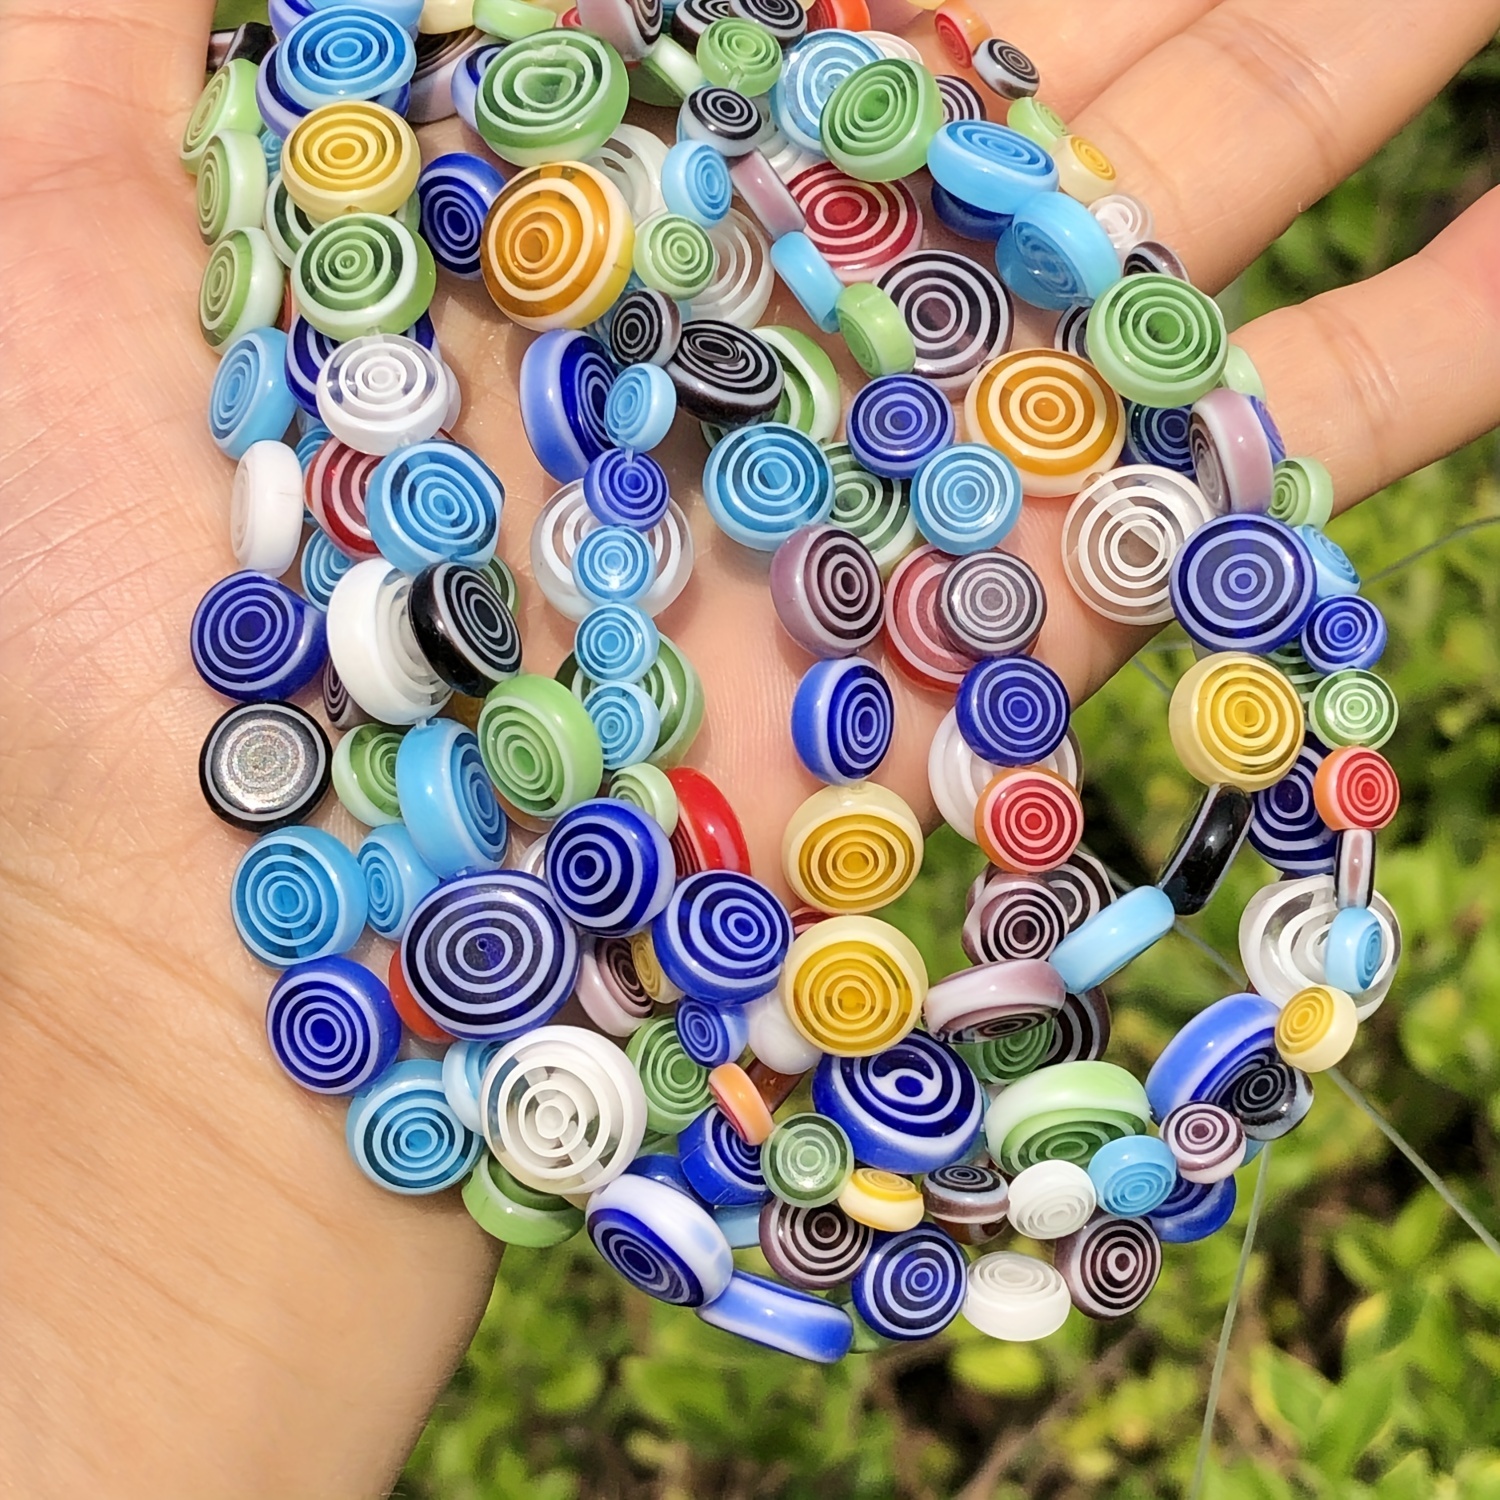 1pcs Big Round 20mm Handmade Flower Lampwork Glass Loose Beads for